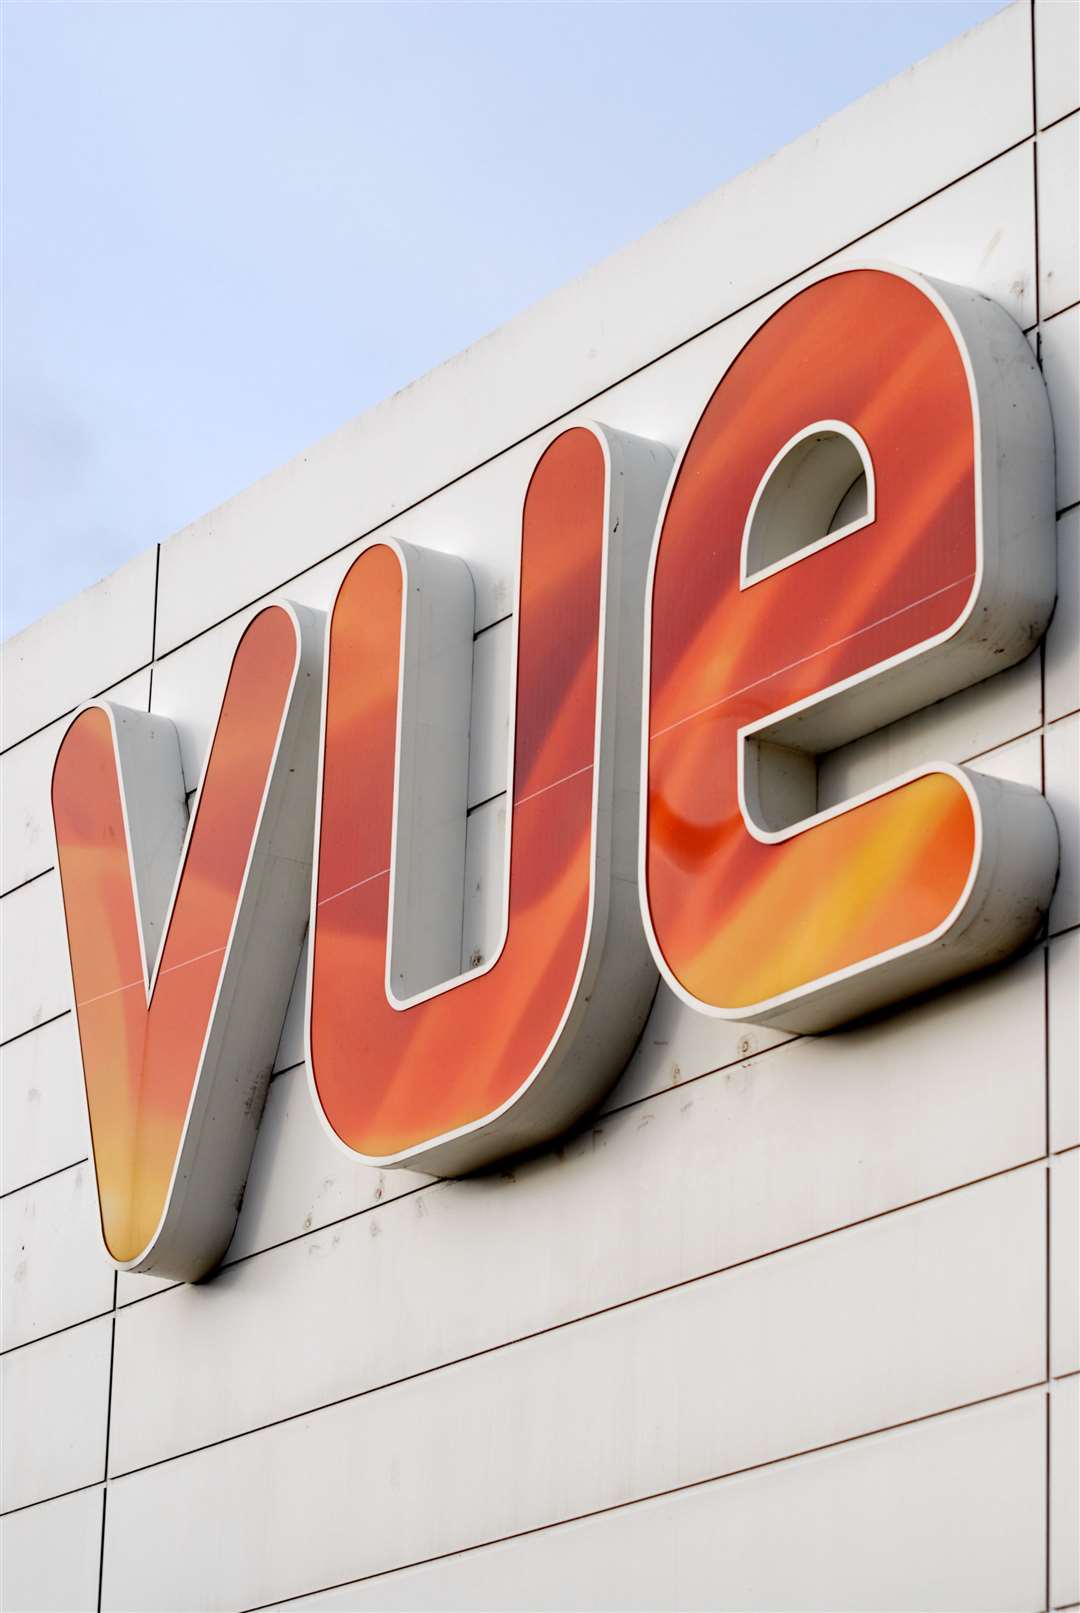 Vue's Inverness Retail Park cinema will reopen later this month.